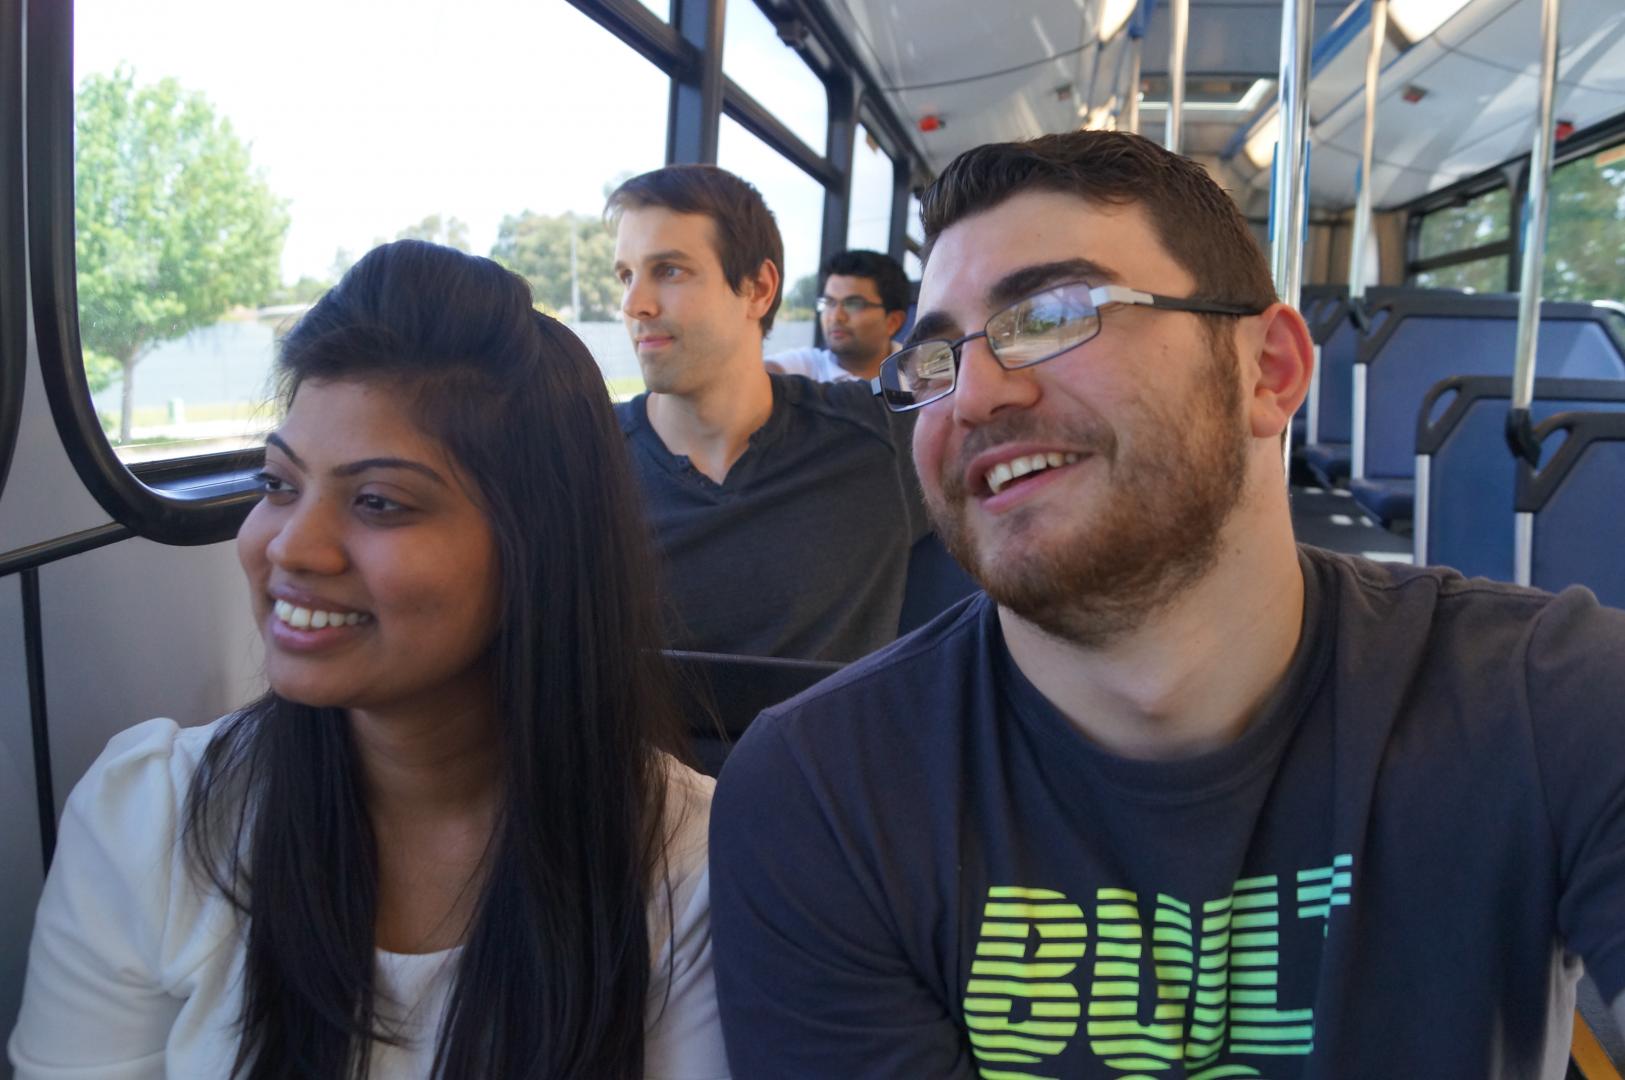 Passengers happy on a bus